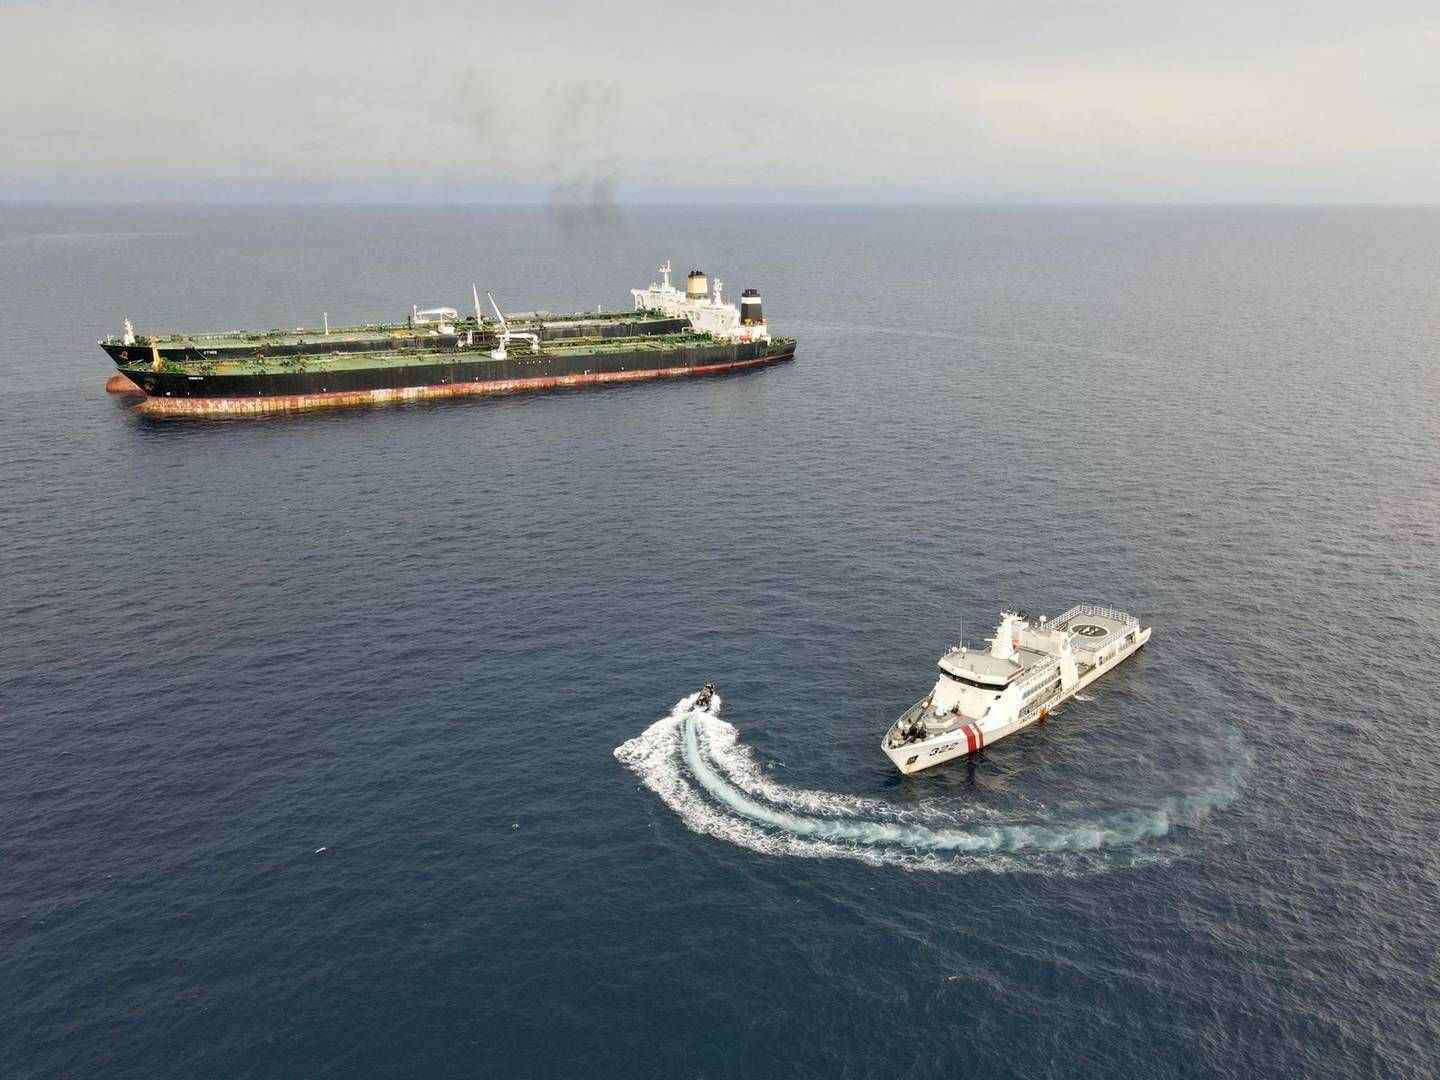 An Indonesian patrol vessel inspects Iranian-flagged tanker MT Arman 114 and the Cameroon-flagged, MT S Tinos, as they were seen transferring oil from ship to ship without authorization near Indonesia's northern Natuna Sea, according to Indonesia's Maritime Security Agency (Bakamla).